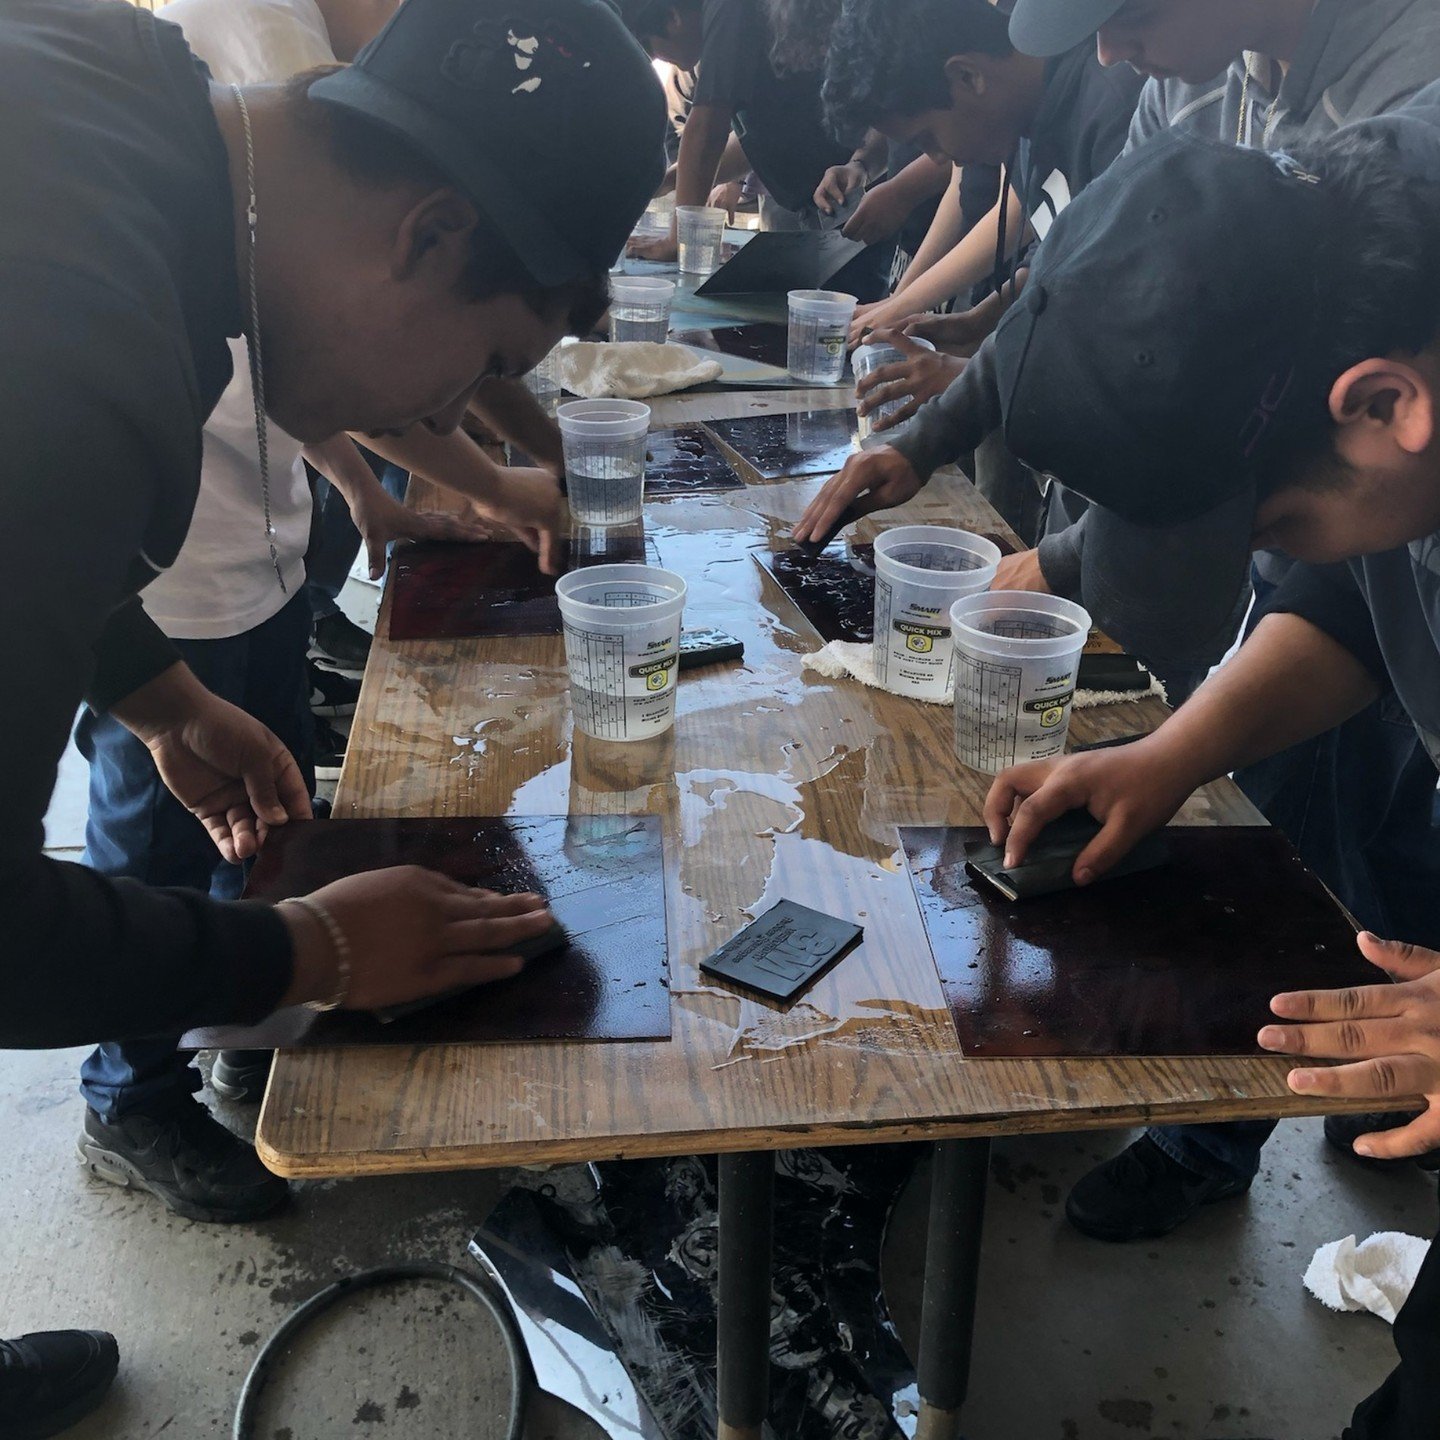 Project Time

Wet setting custom panels with 1500 grit sandpaper. Thank you to @3mcollision for the supplies.

@jusd_cte @rubidoux_jusd